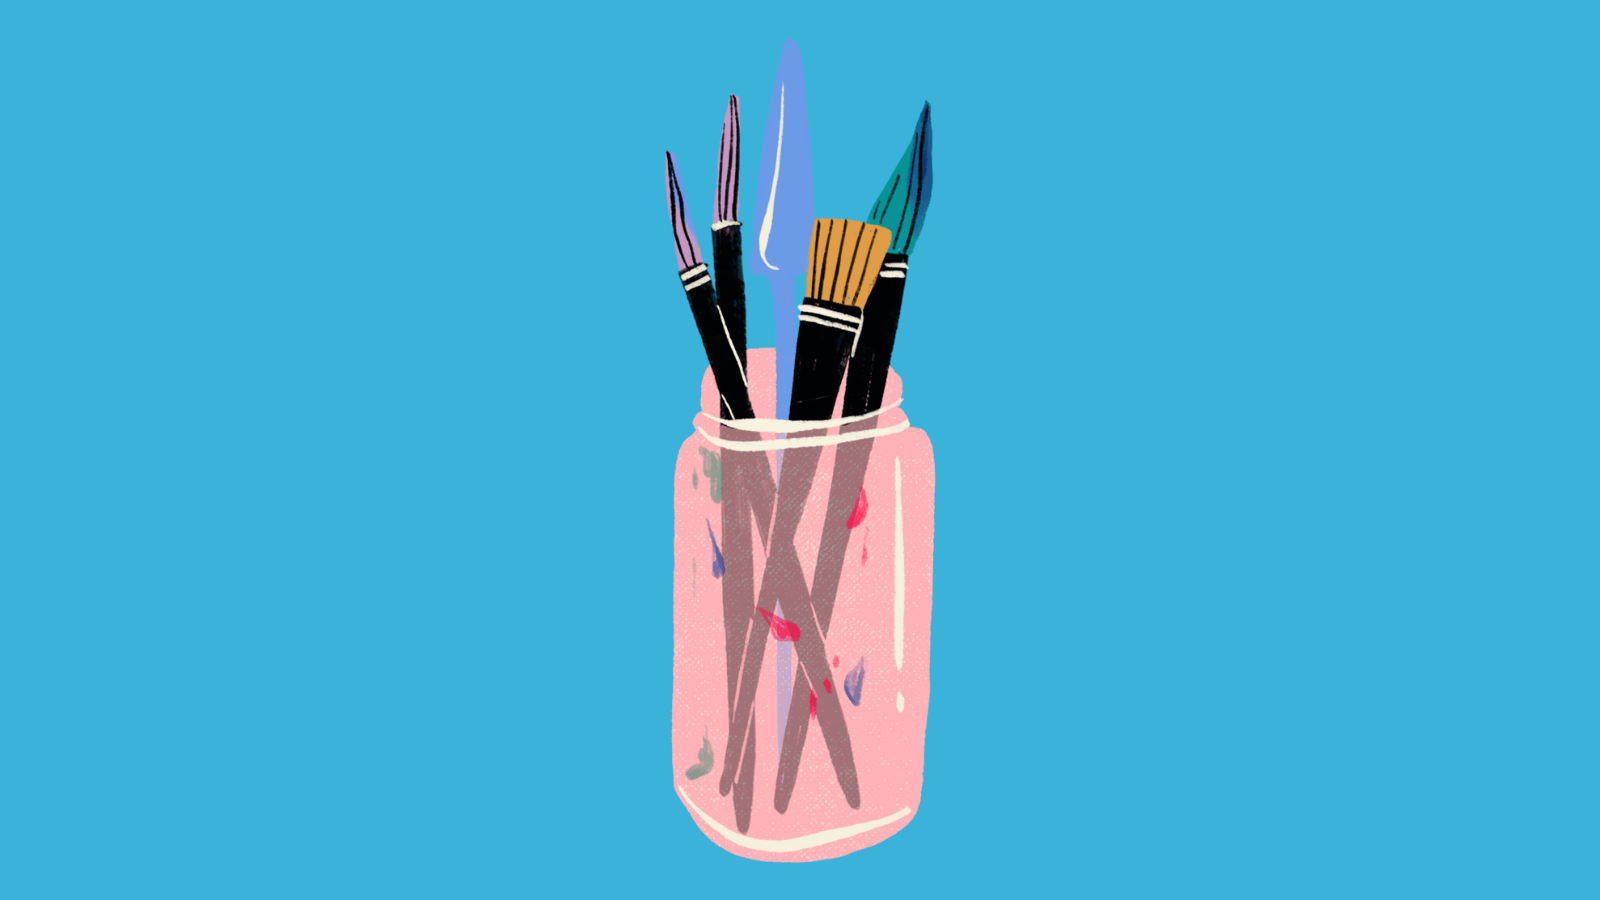 A jar of paint brushes